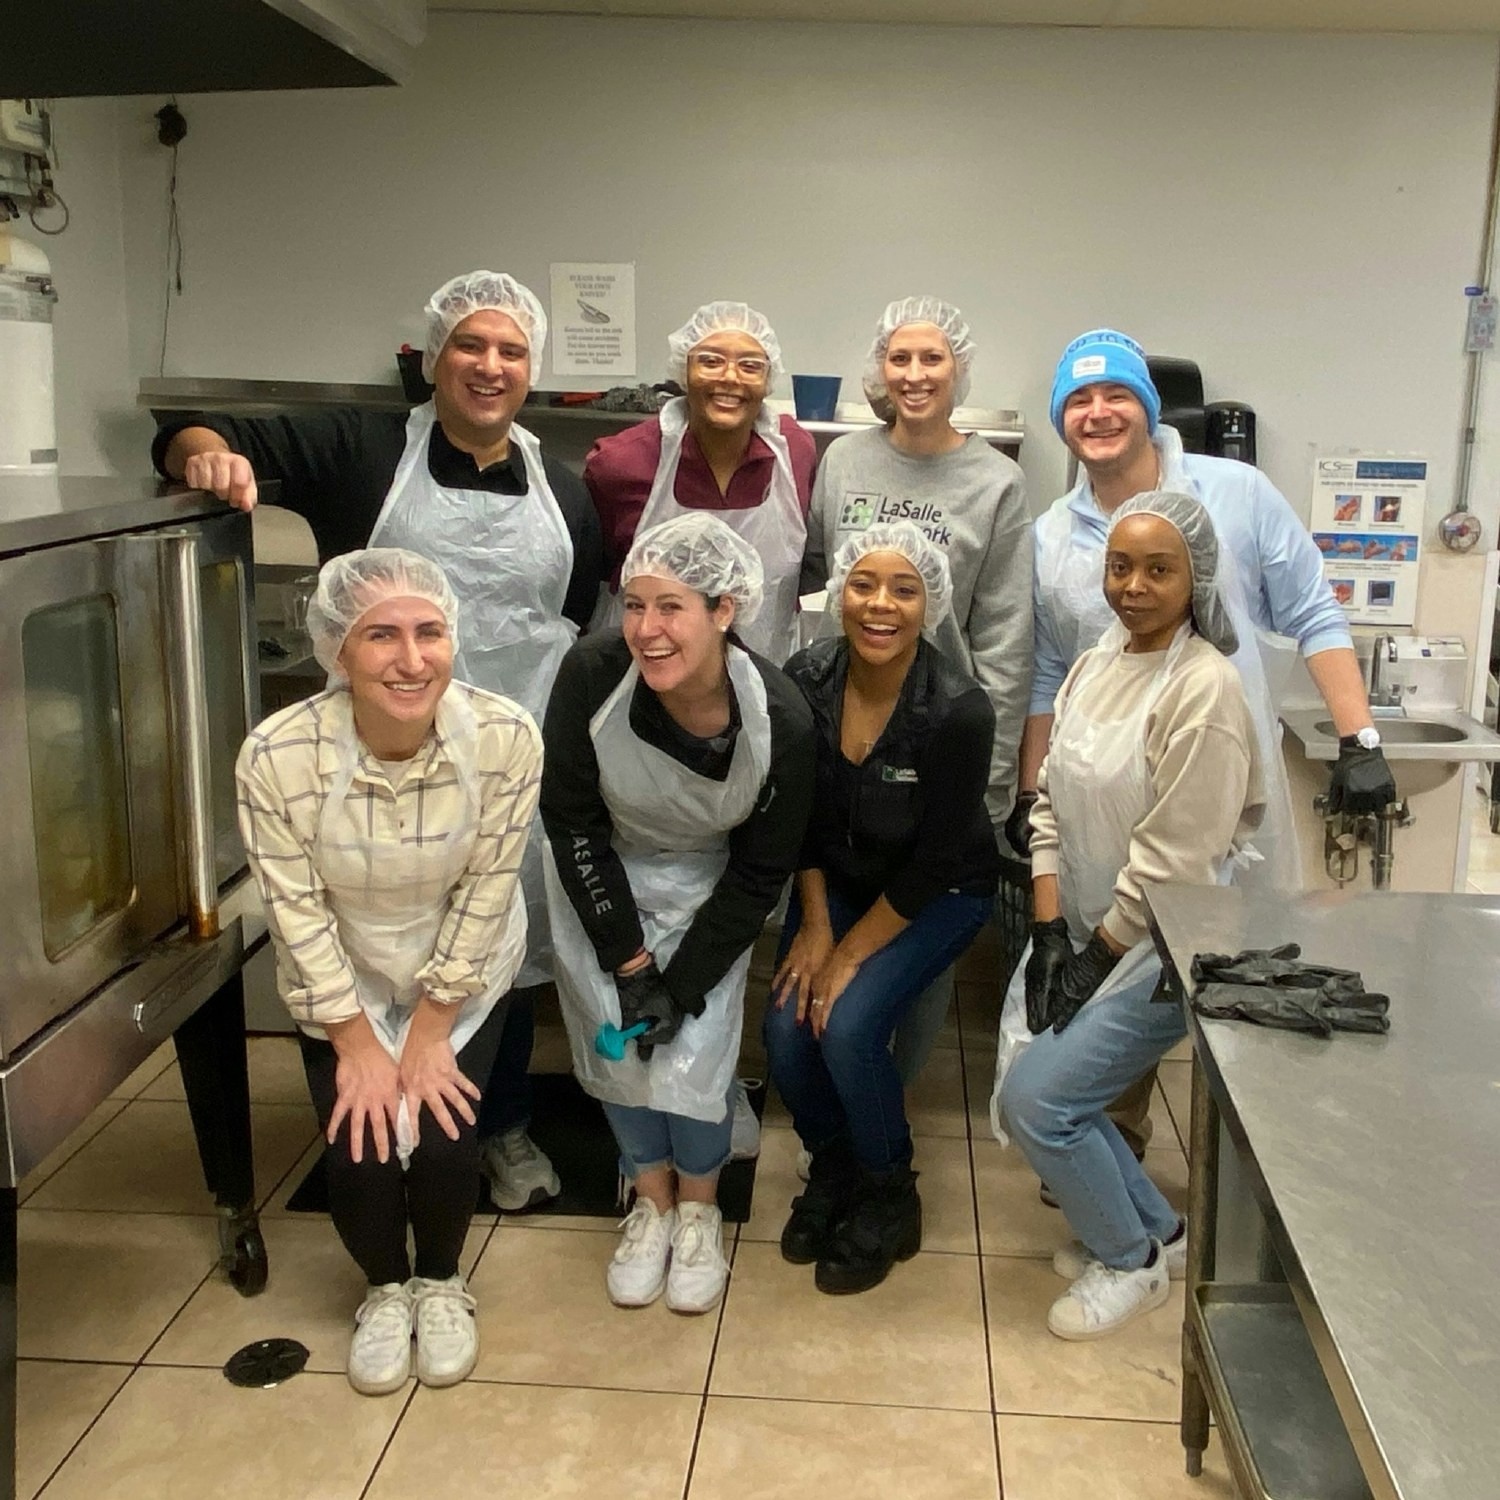 Volunteering with Breakthrough to prepare and serve warm meals to those in need who are facing homelessness 